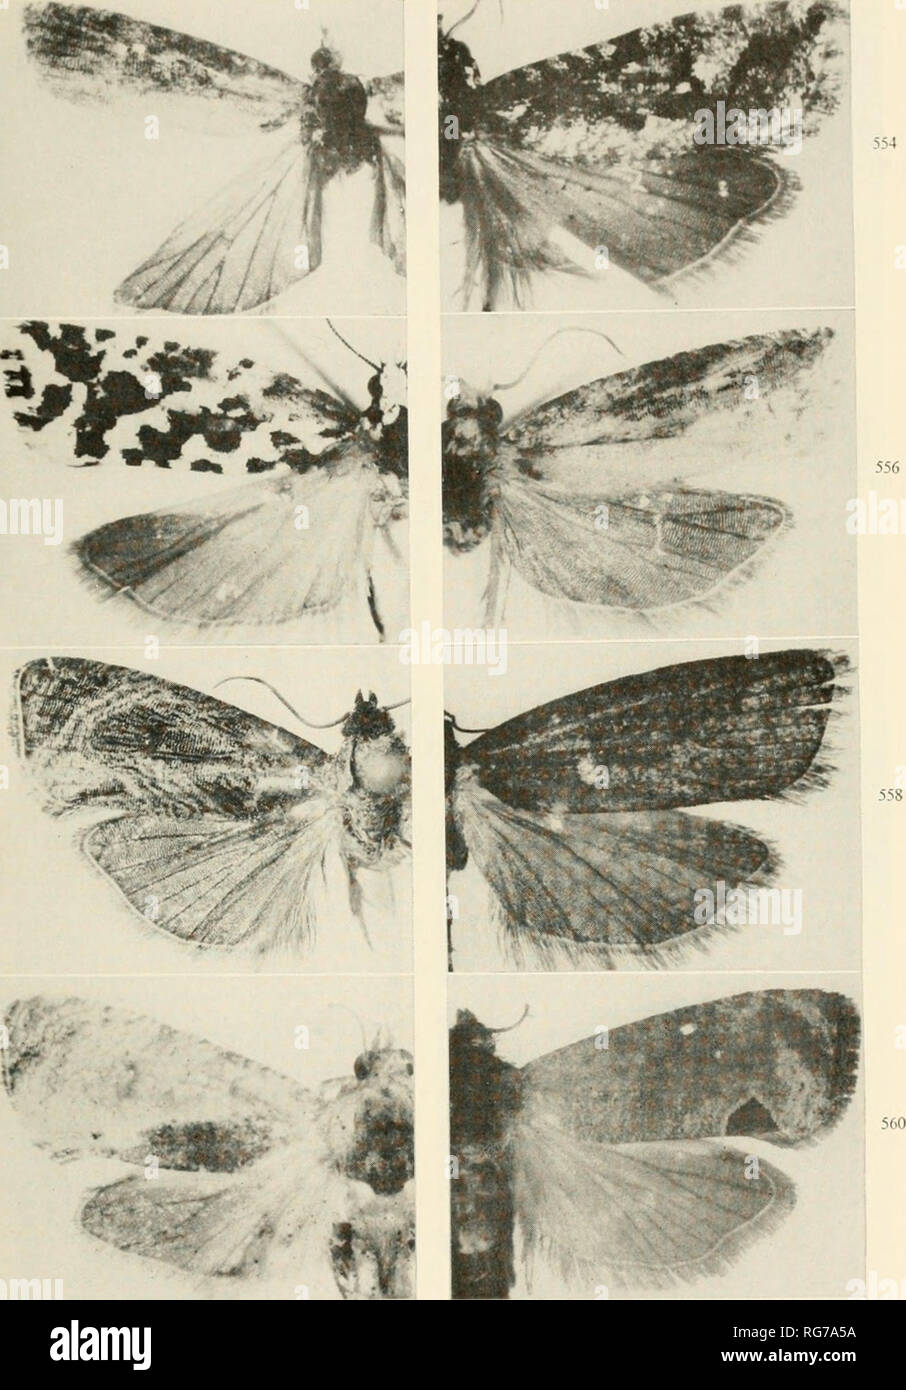 . Bulletin - United States National Museum. Science. MICROLEPIDOPTERA OF PHILIPPINE ISLANDS 423. Figures 553-560.—Olethreutinae: 553, Strepsicrales inobtrusa, new species, cf, holotype; 554, S. discobola, new species, cf, holotype; 555, Petrova scalaris, new species, ?, holotype; 556, Eucosma iographa, new species, c?', holotype; 557, Cryptophlebia tetra- ploca (Meyrick), cf; 558, Cryptaspasma {Allobrachygonia) hesyca Diakonoff, cf, para- type; 559, C. (C.) ombrodelta (Lower), cf; 560, ? .. Please note that these images are extracted from scanned page images that may have been digitally enhanc Stock Photo